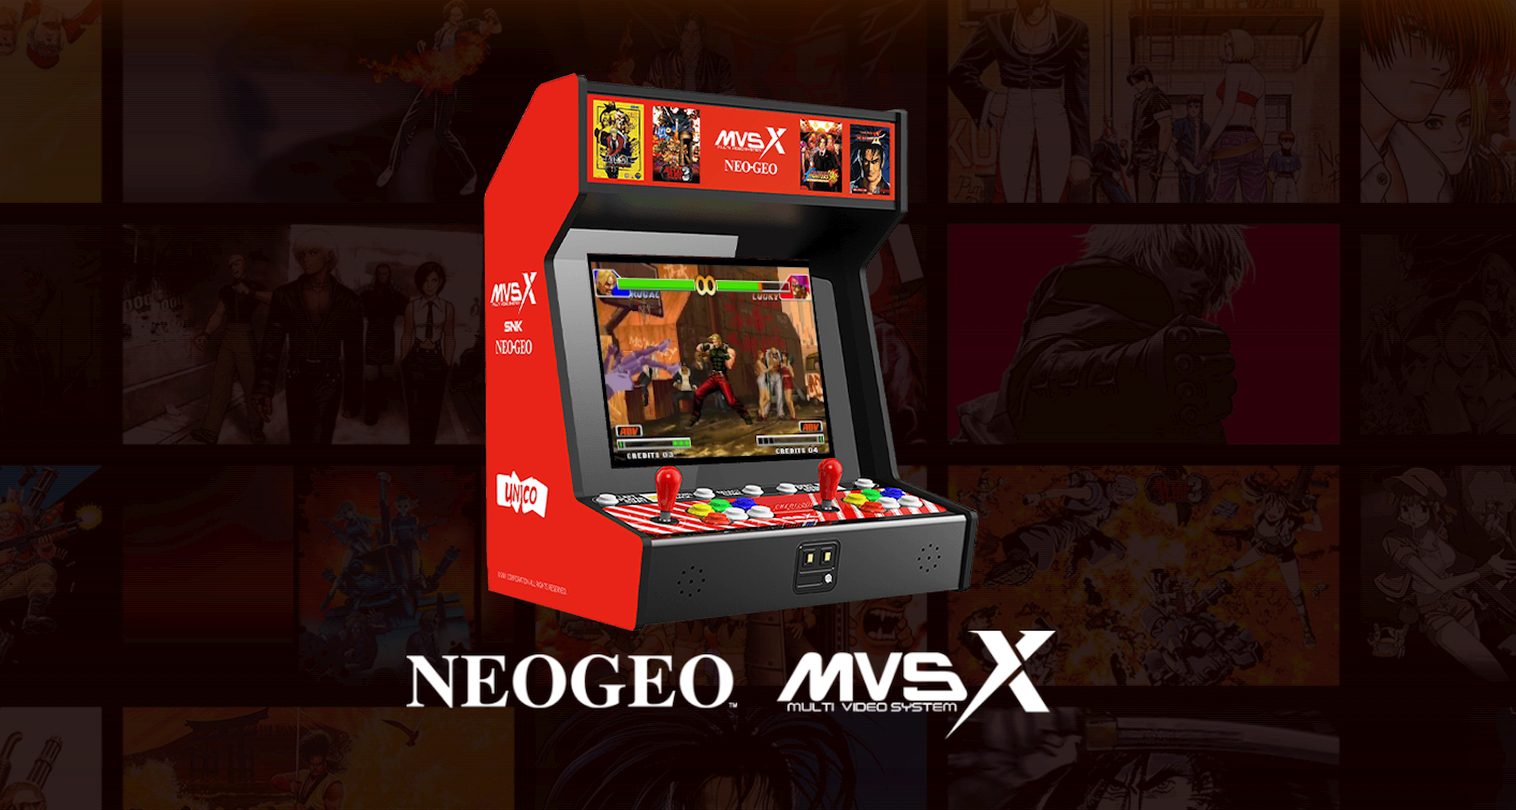 SNK NEOGEO MVSX Arcade coming home with 50 Classic SNK Titles